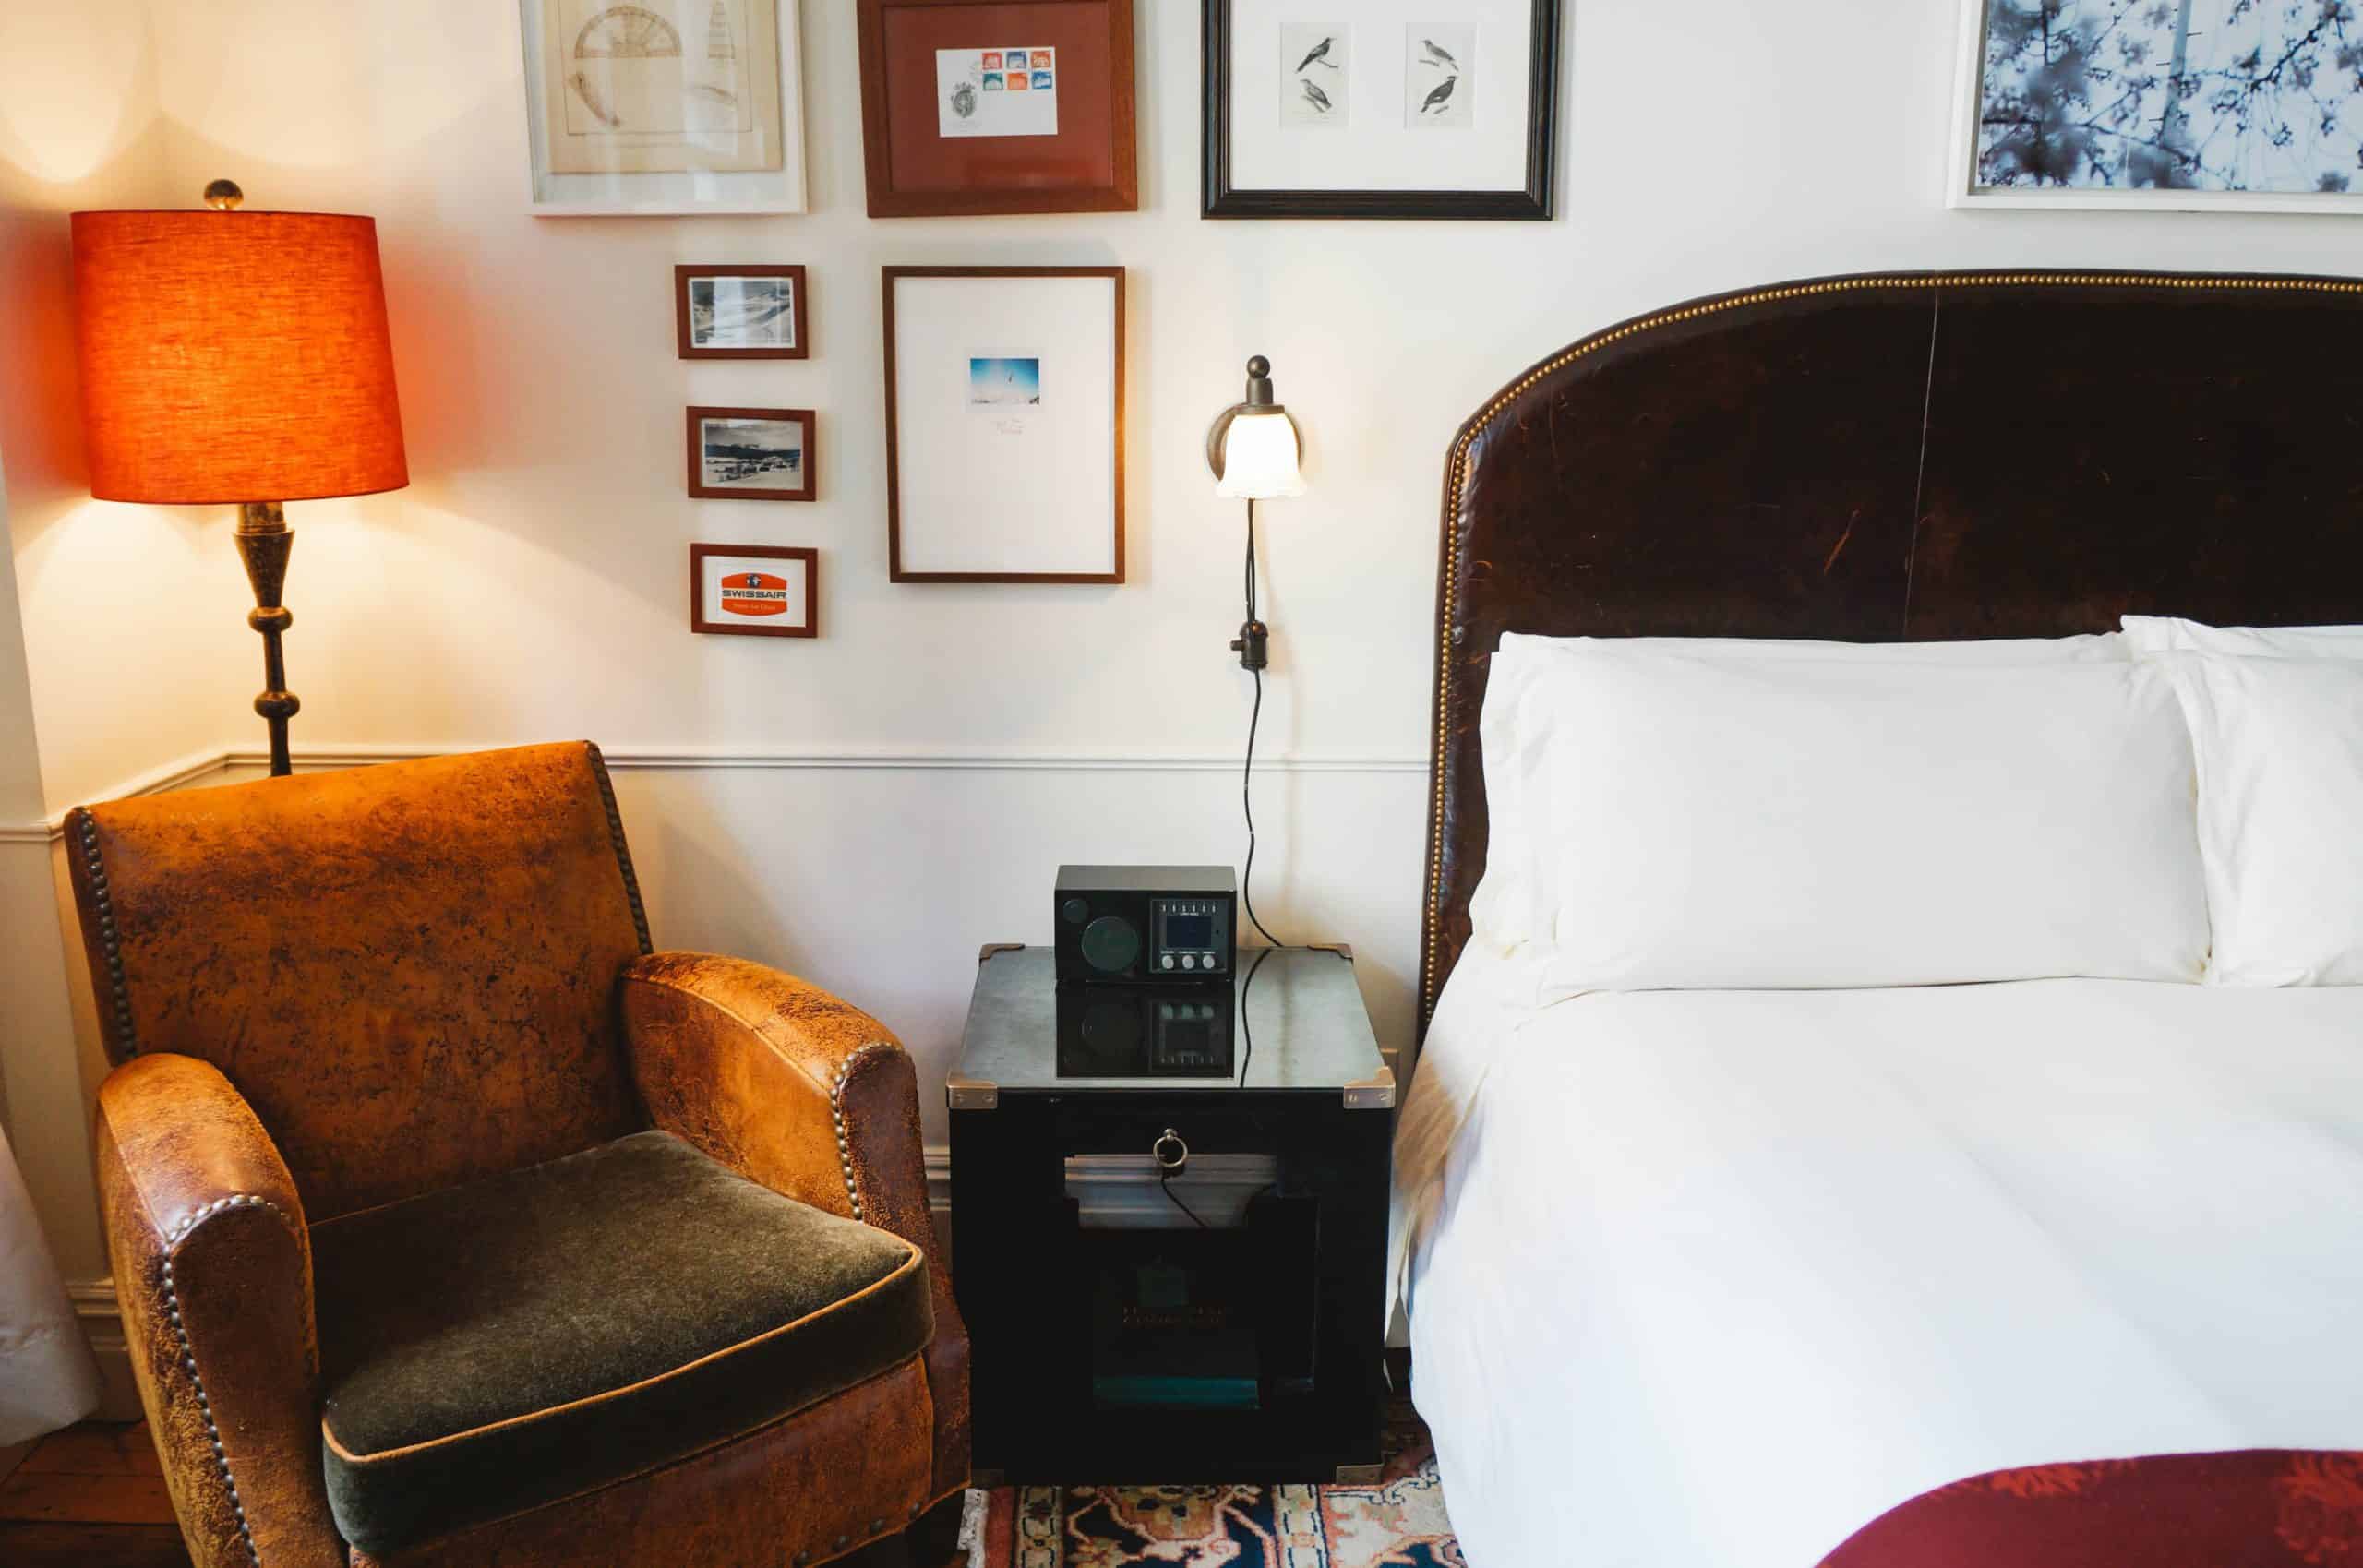 A review of the NoMad Hotel, a luxury boutique hotel in NYC. Located near Madison Square Park, find out everything you need to know before you book.